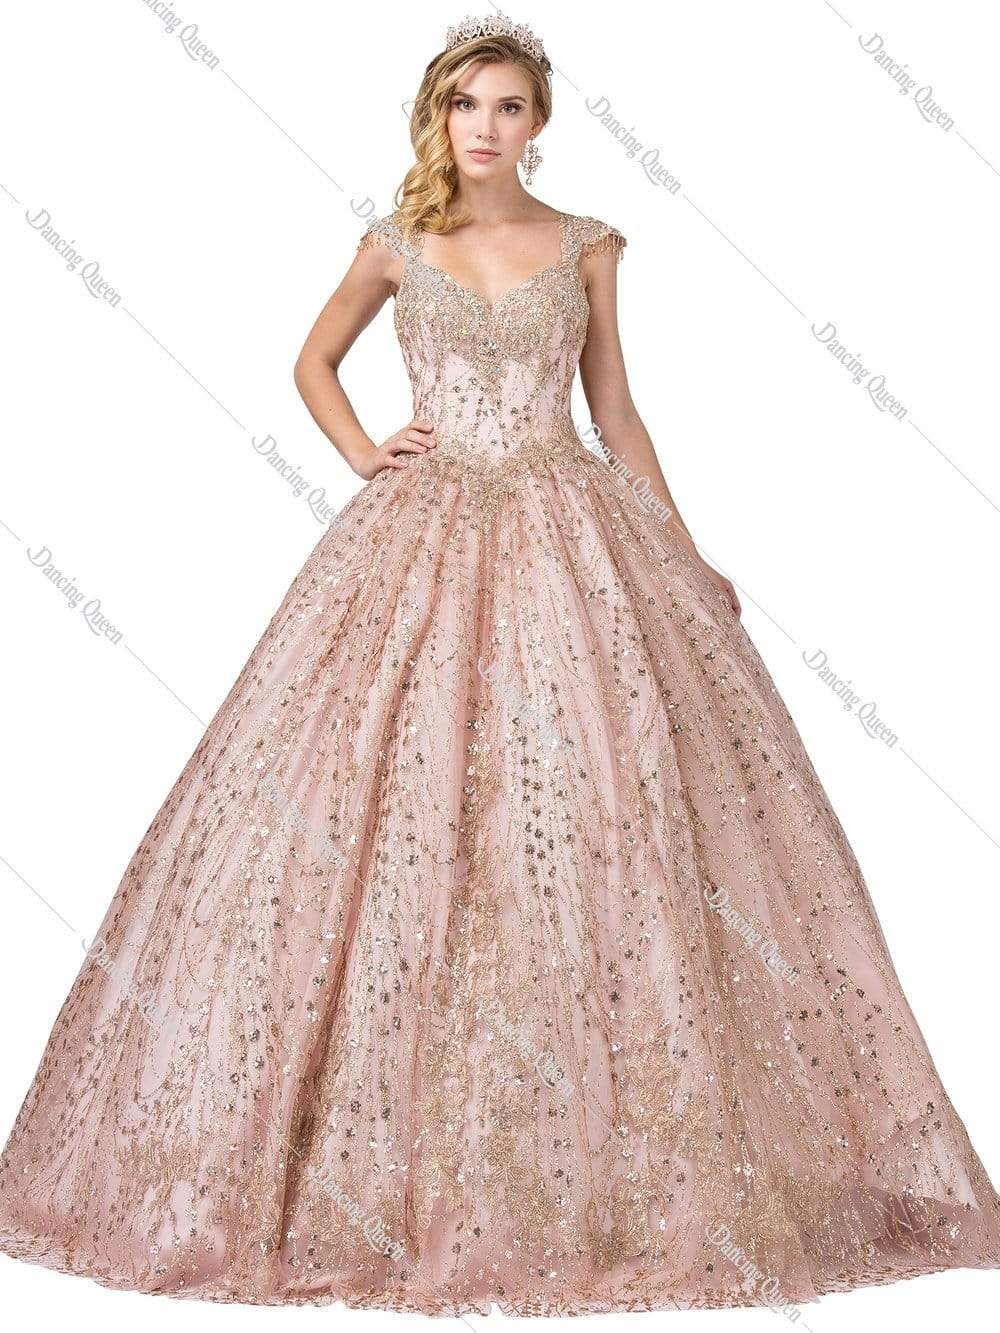 Dancing Queen - 1397 Sweetheart Bodice Gold Accented Ballgown
